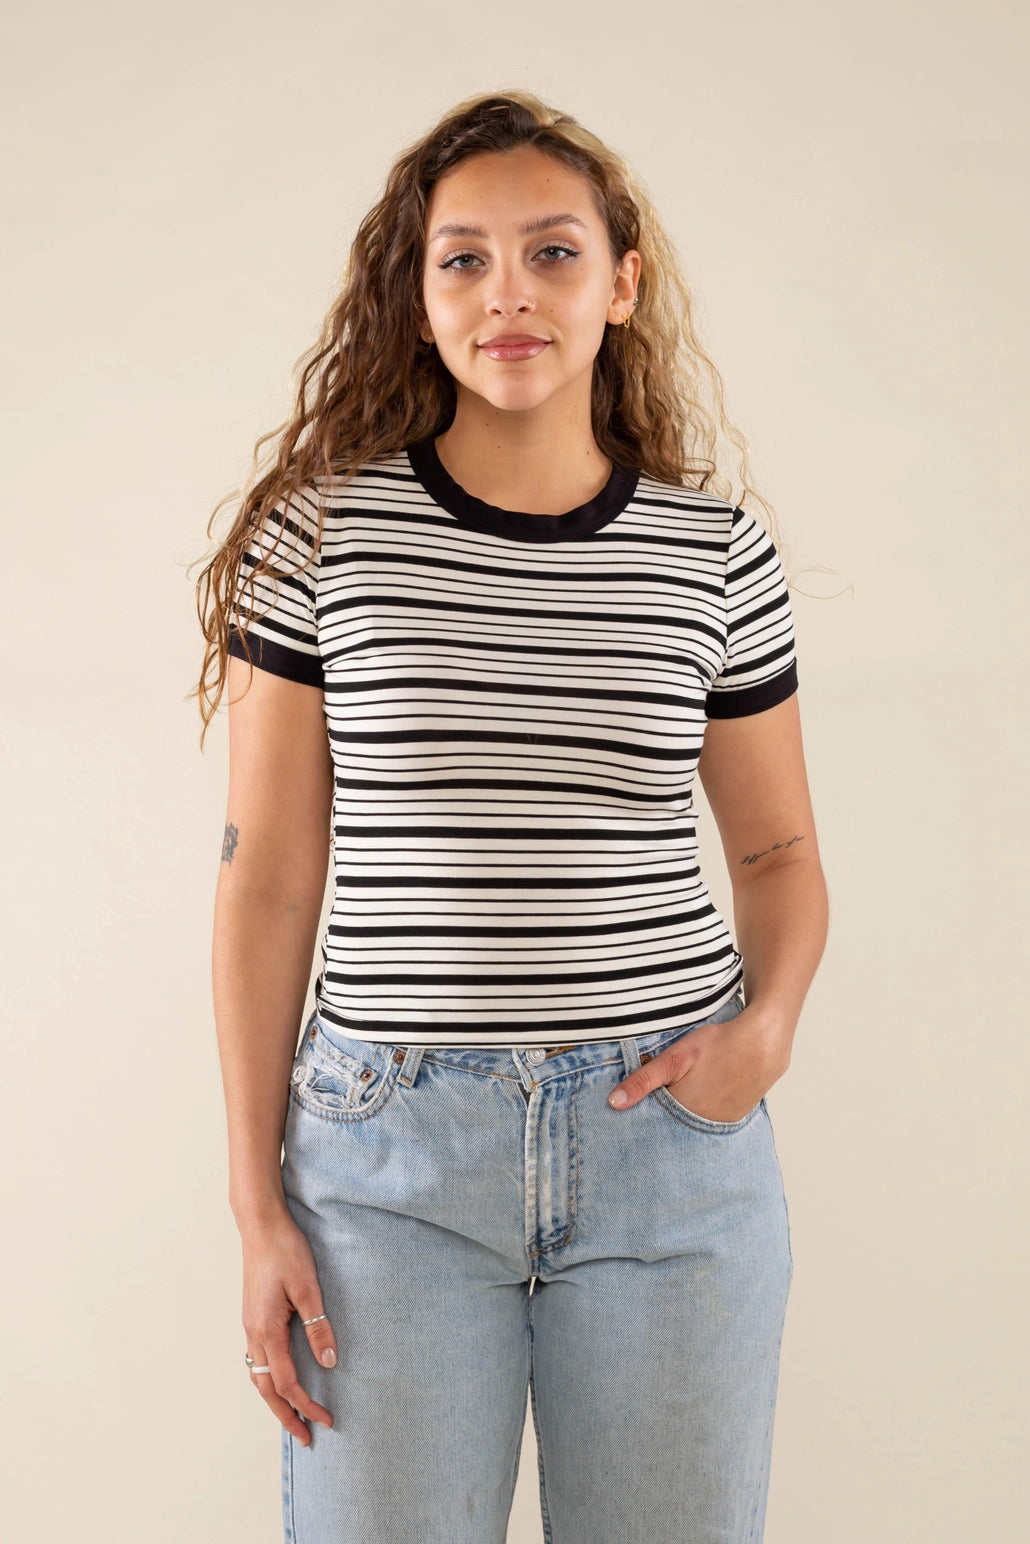 Black and Ivory Striped Top Apex Ethical Boutique